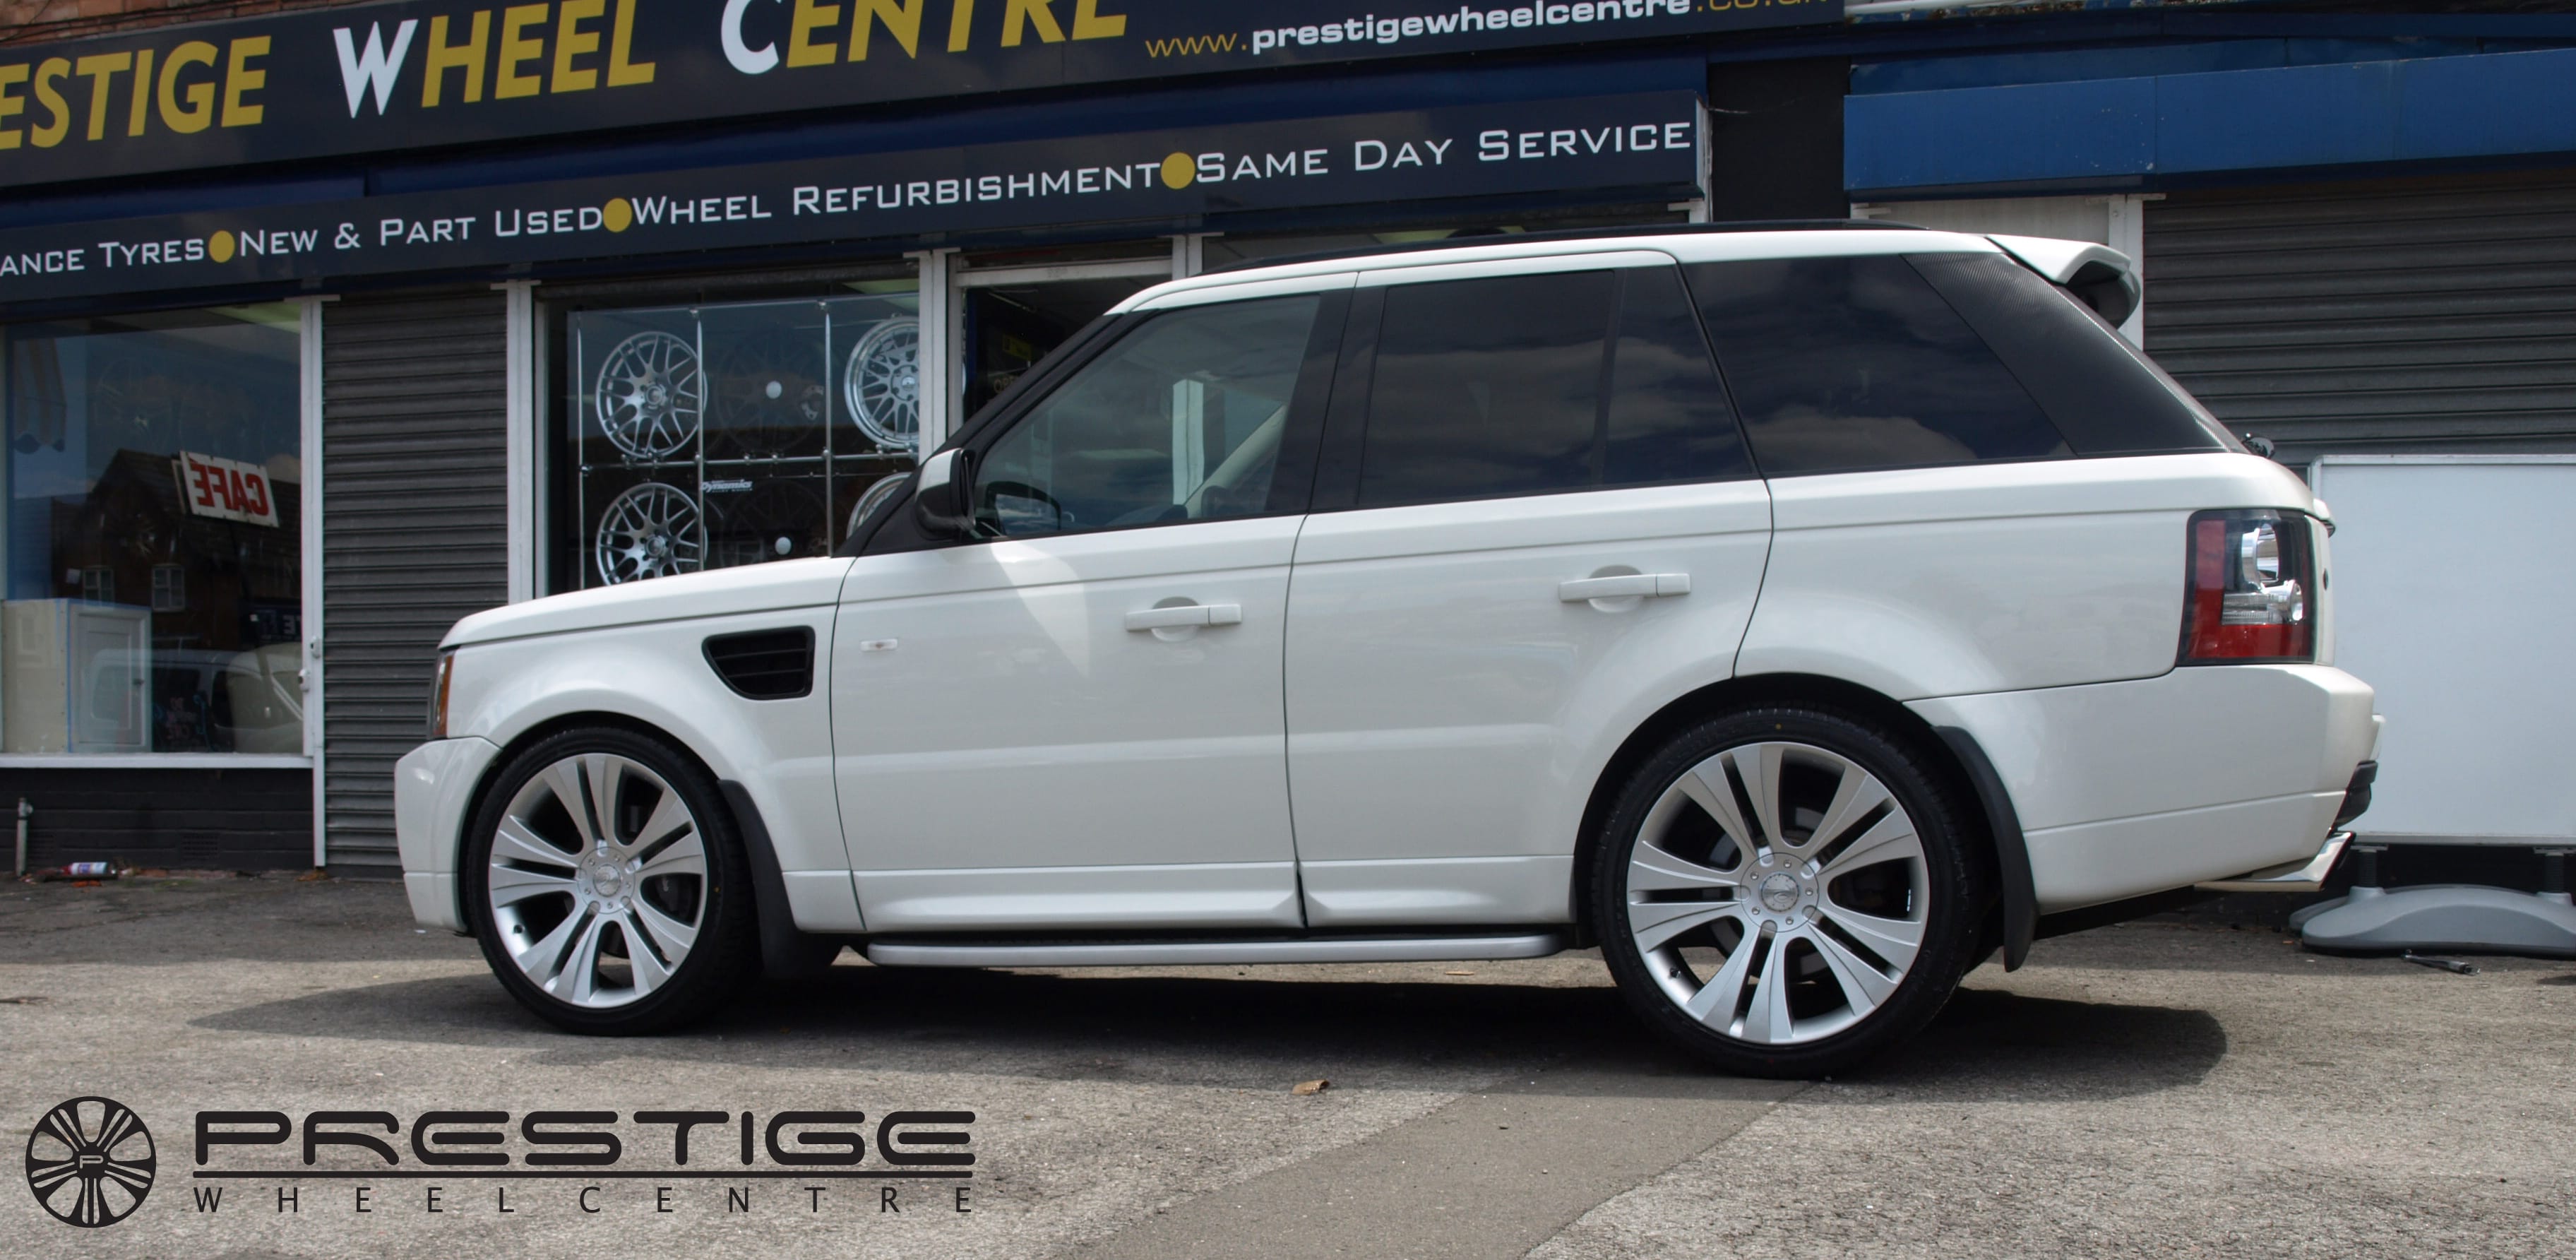 Vogue alloy wheels for Range Rover